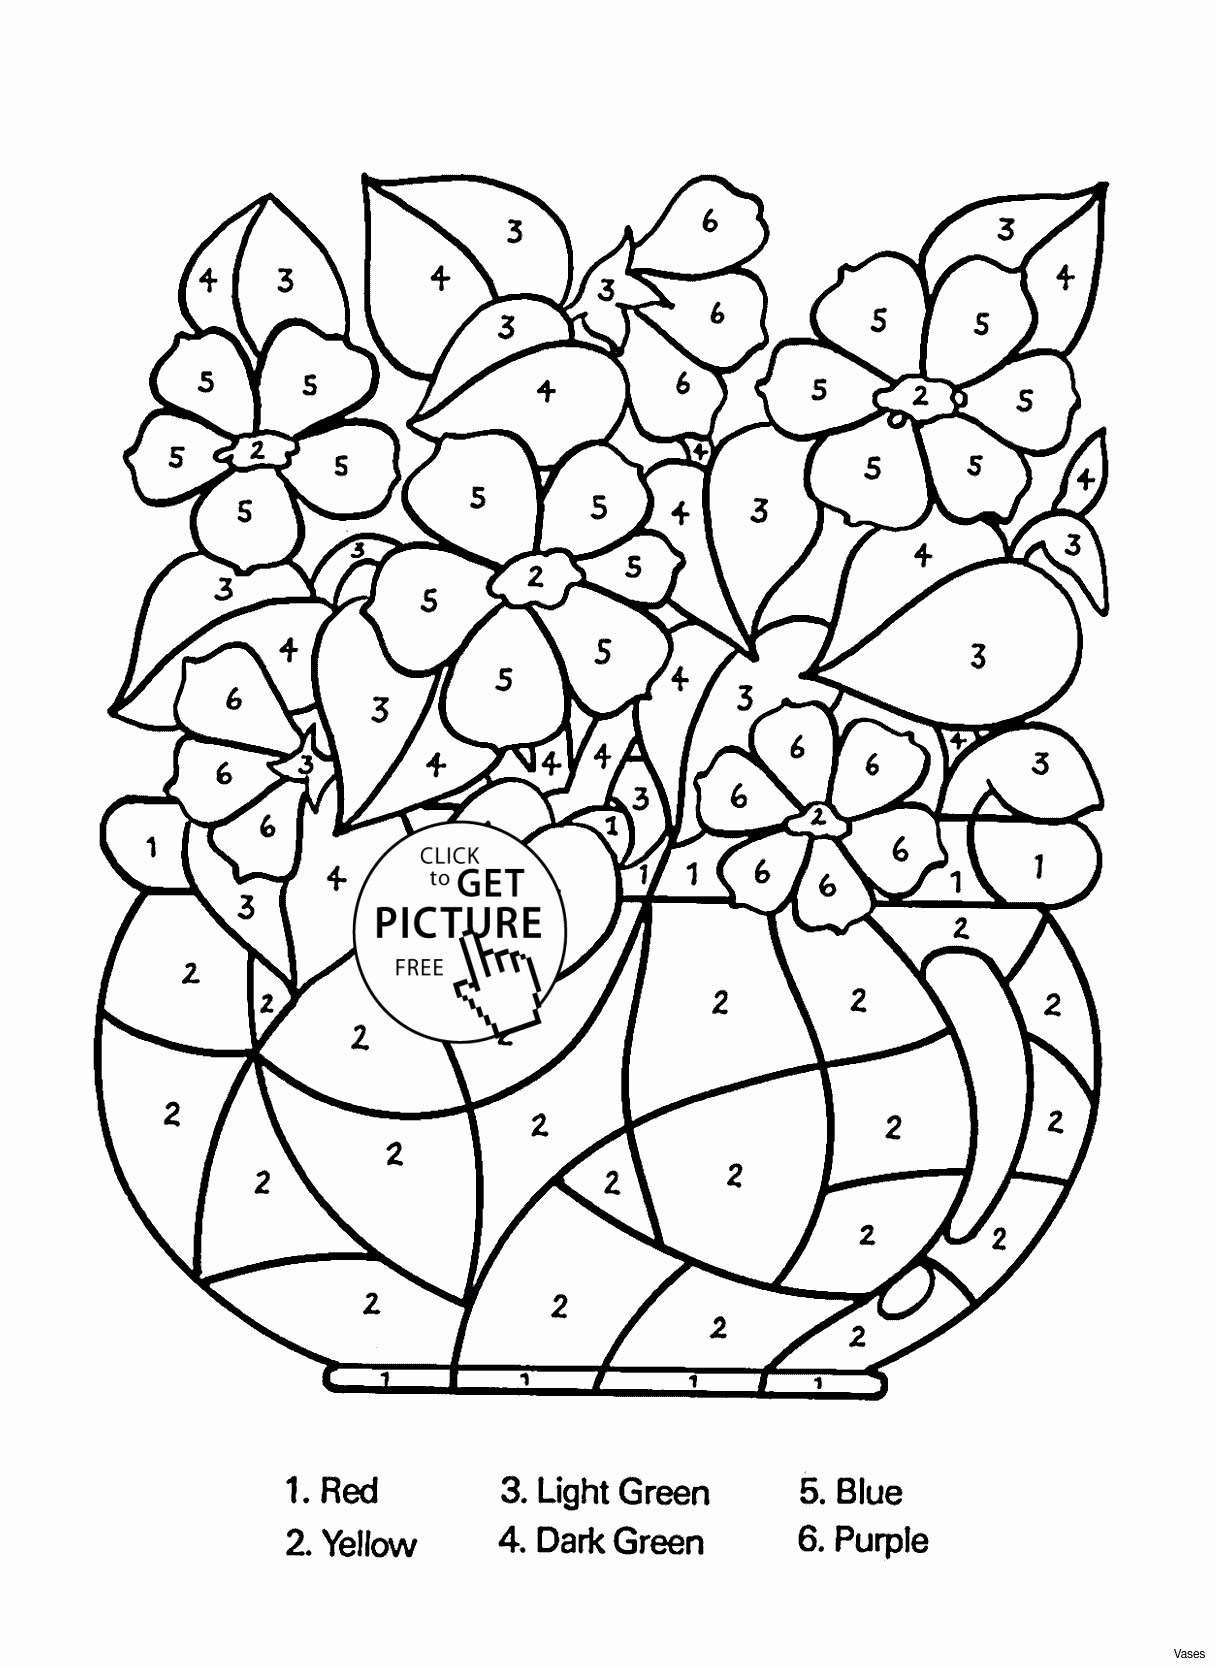 6 inch cube vase of black glass vases photos vases flower vase coloring page pages with regard to black glass vases photos vases flower vase coloring page pages flowers in a top i 0d and